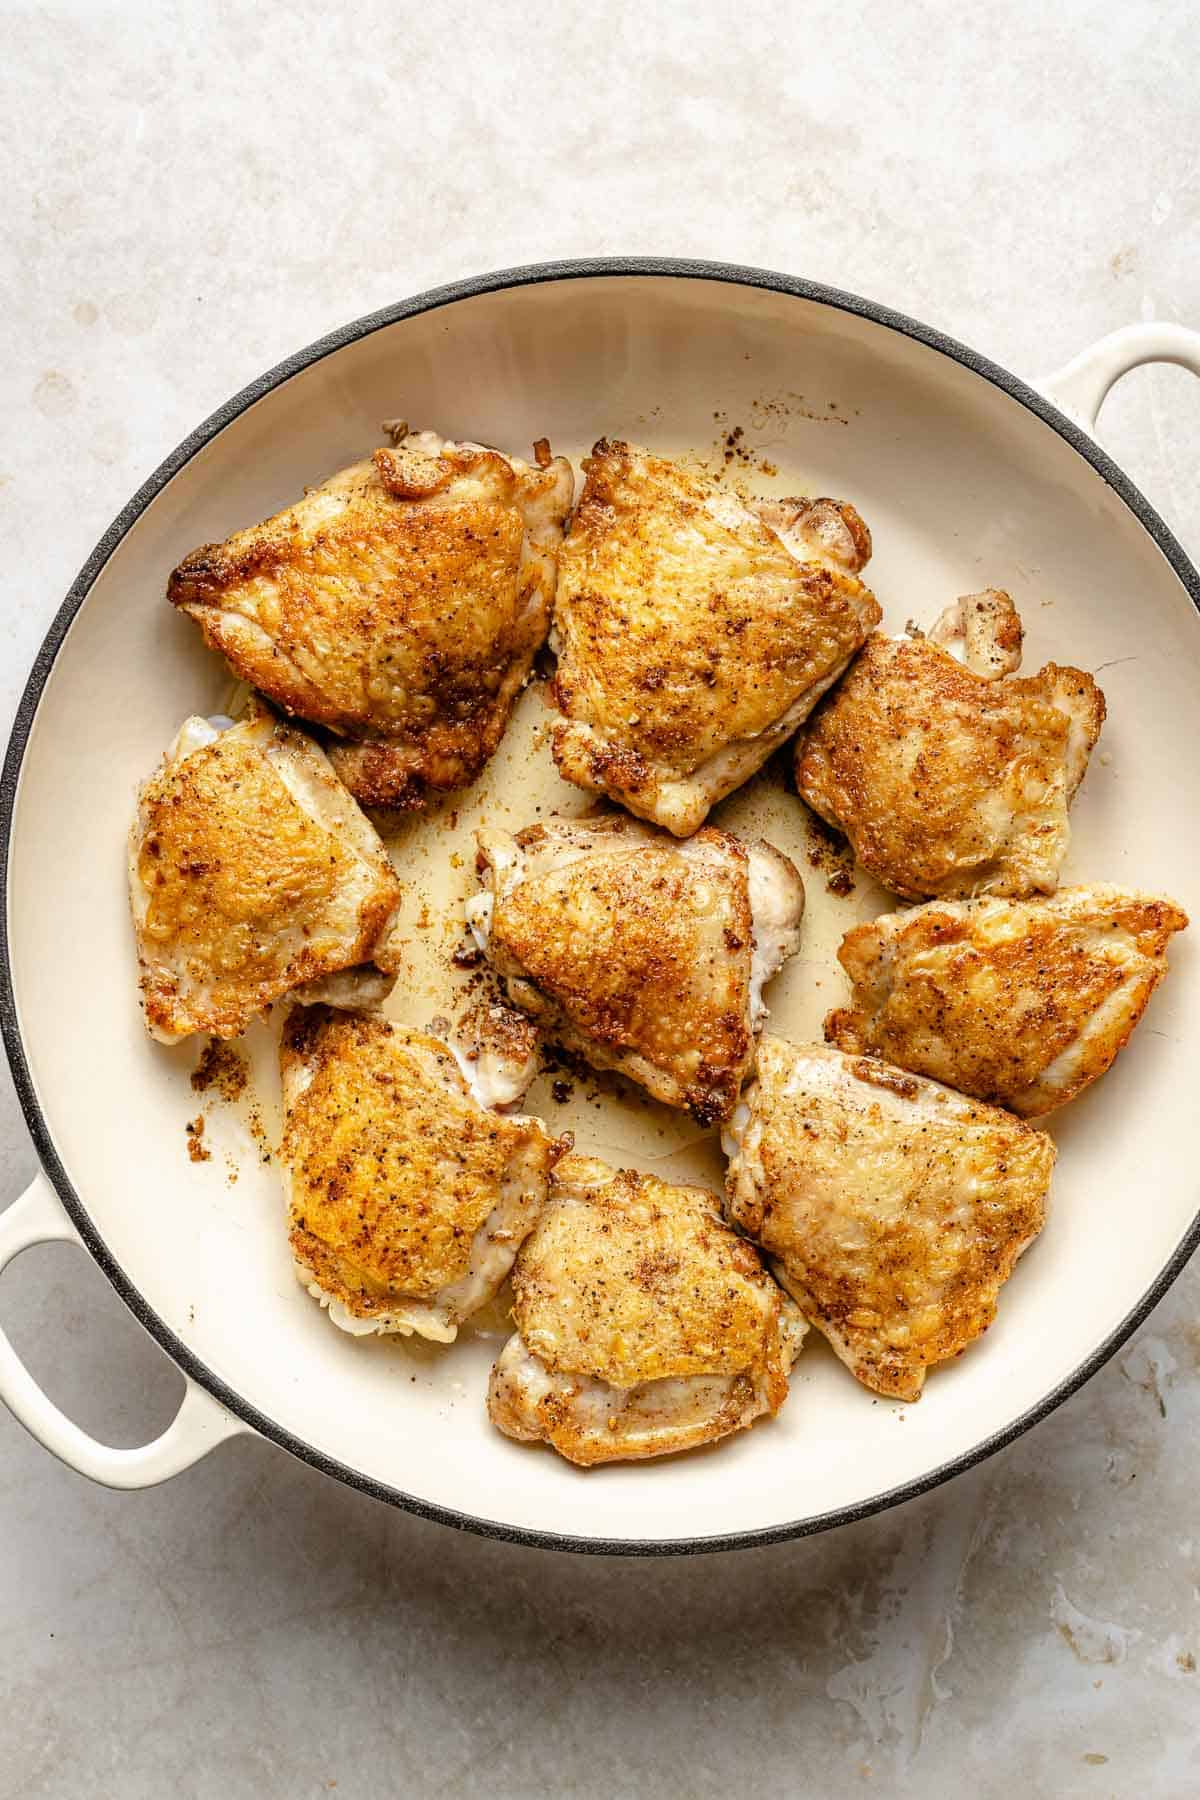 Searing chicken in a pan.